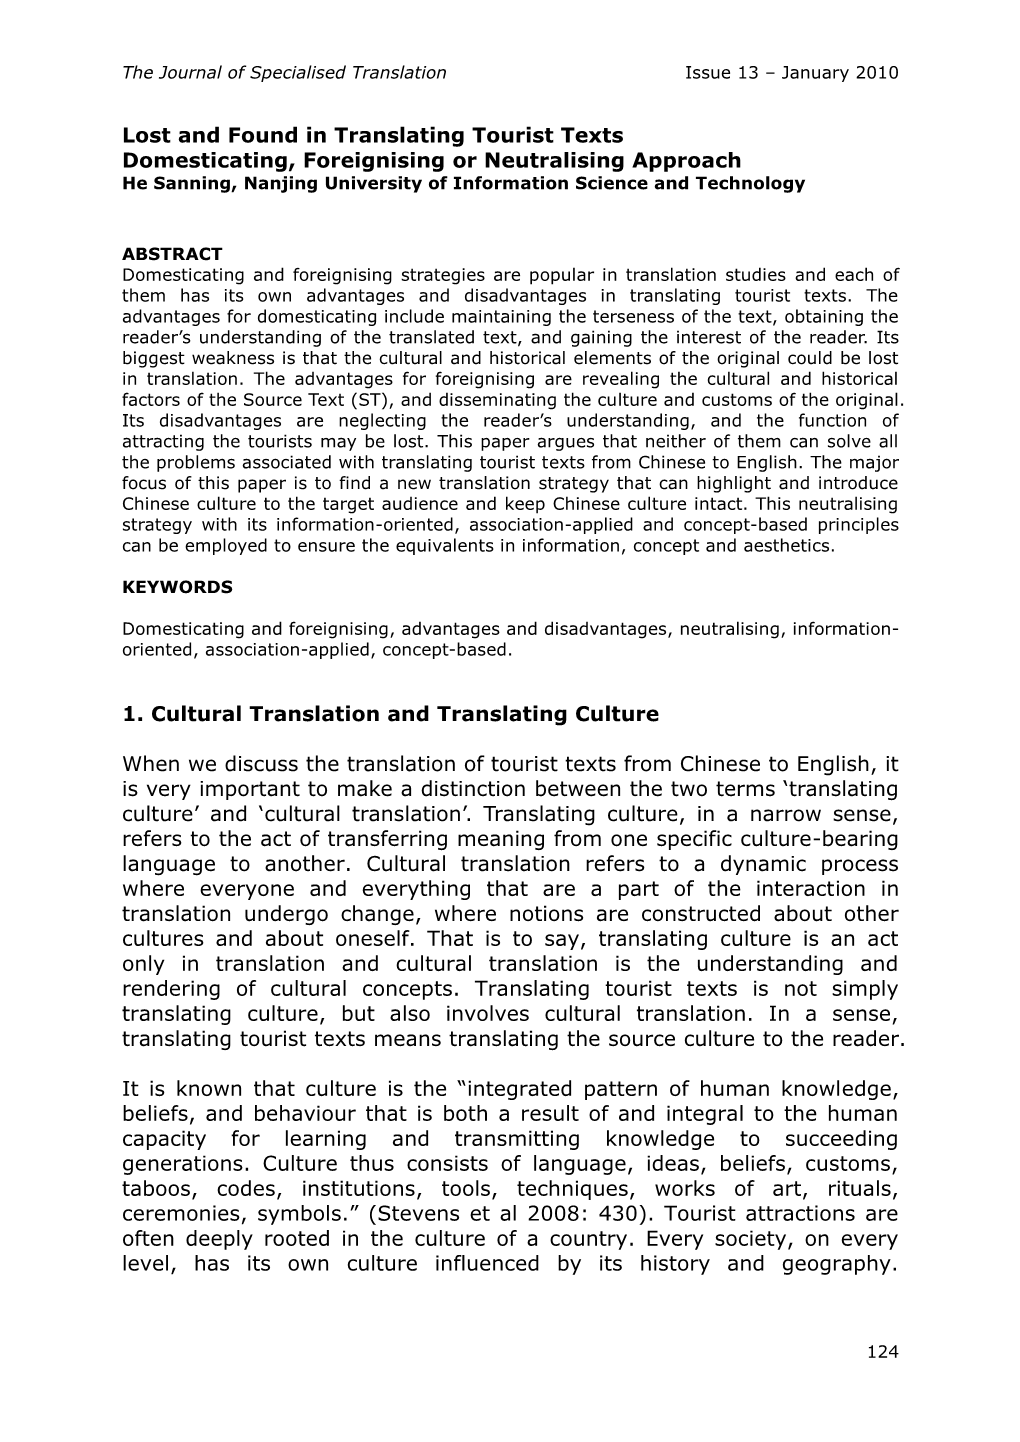 Lost and Found in Translating Tourist Texts Domesticating, Foreignising Or Neutralising Approach He Sanning, Nanjing University of Information Science and Technology